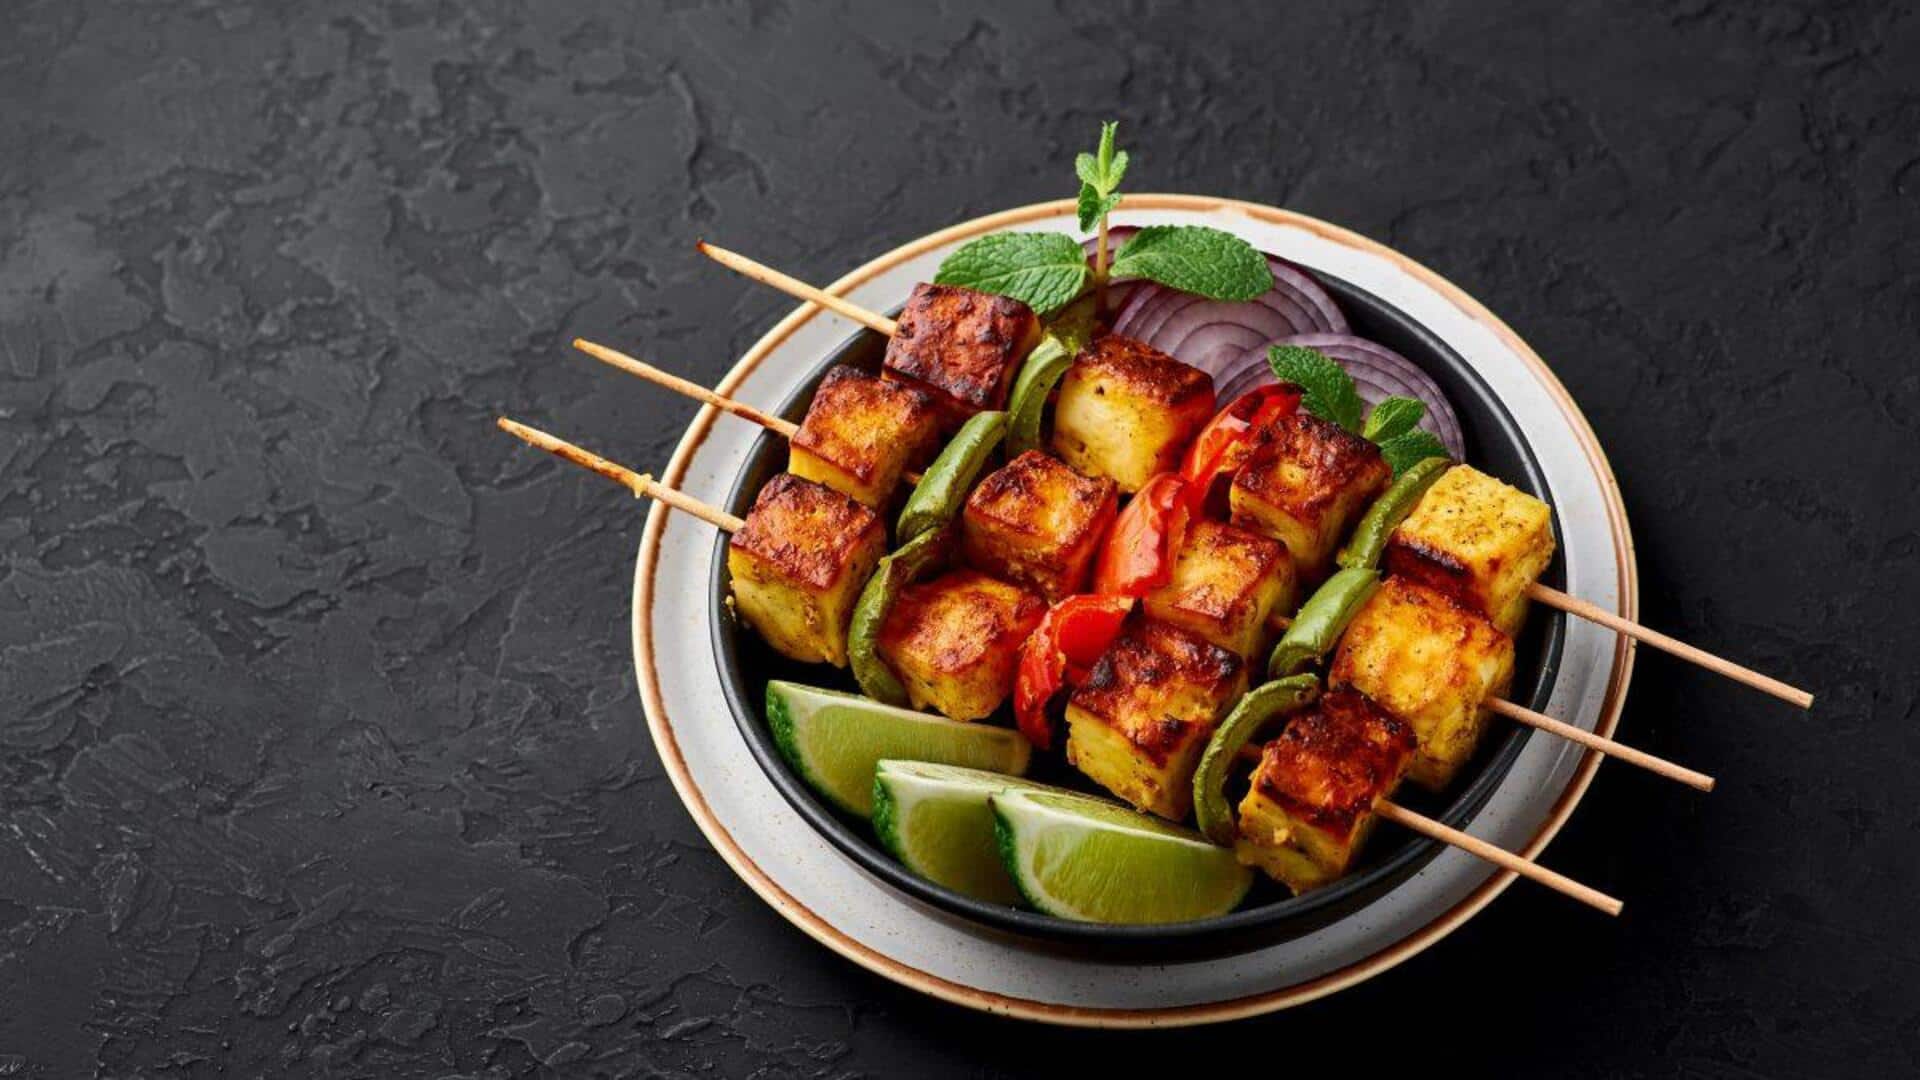 It's recipe time! Cook this delicious paneer tikka at home